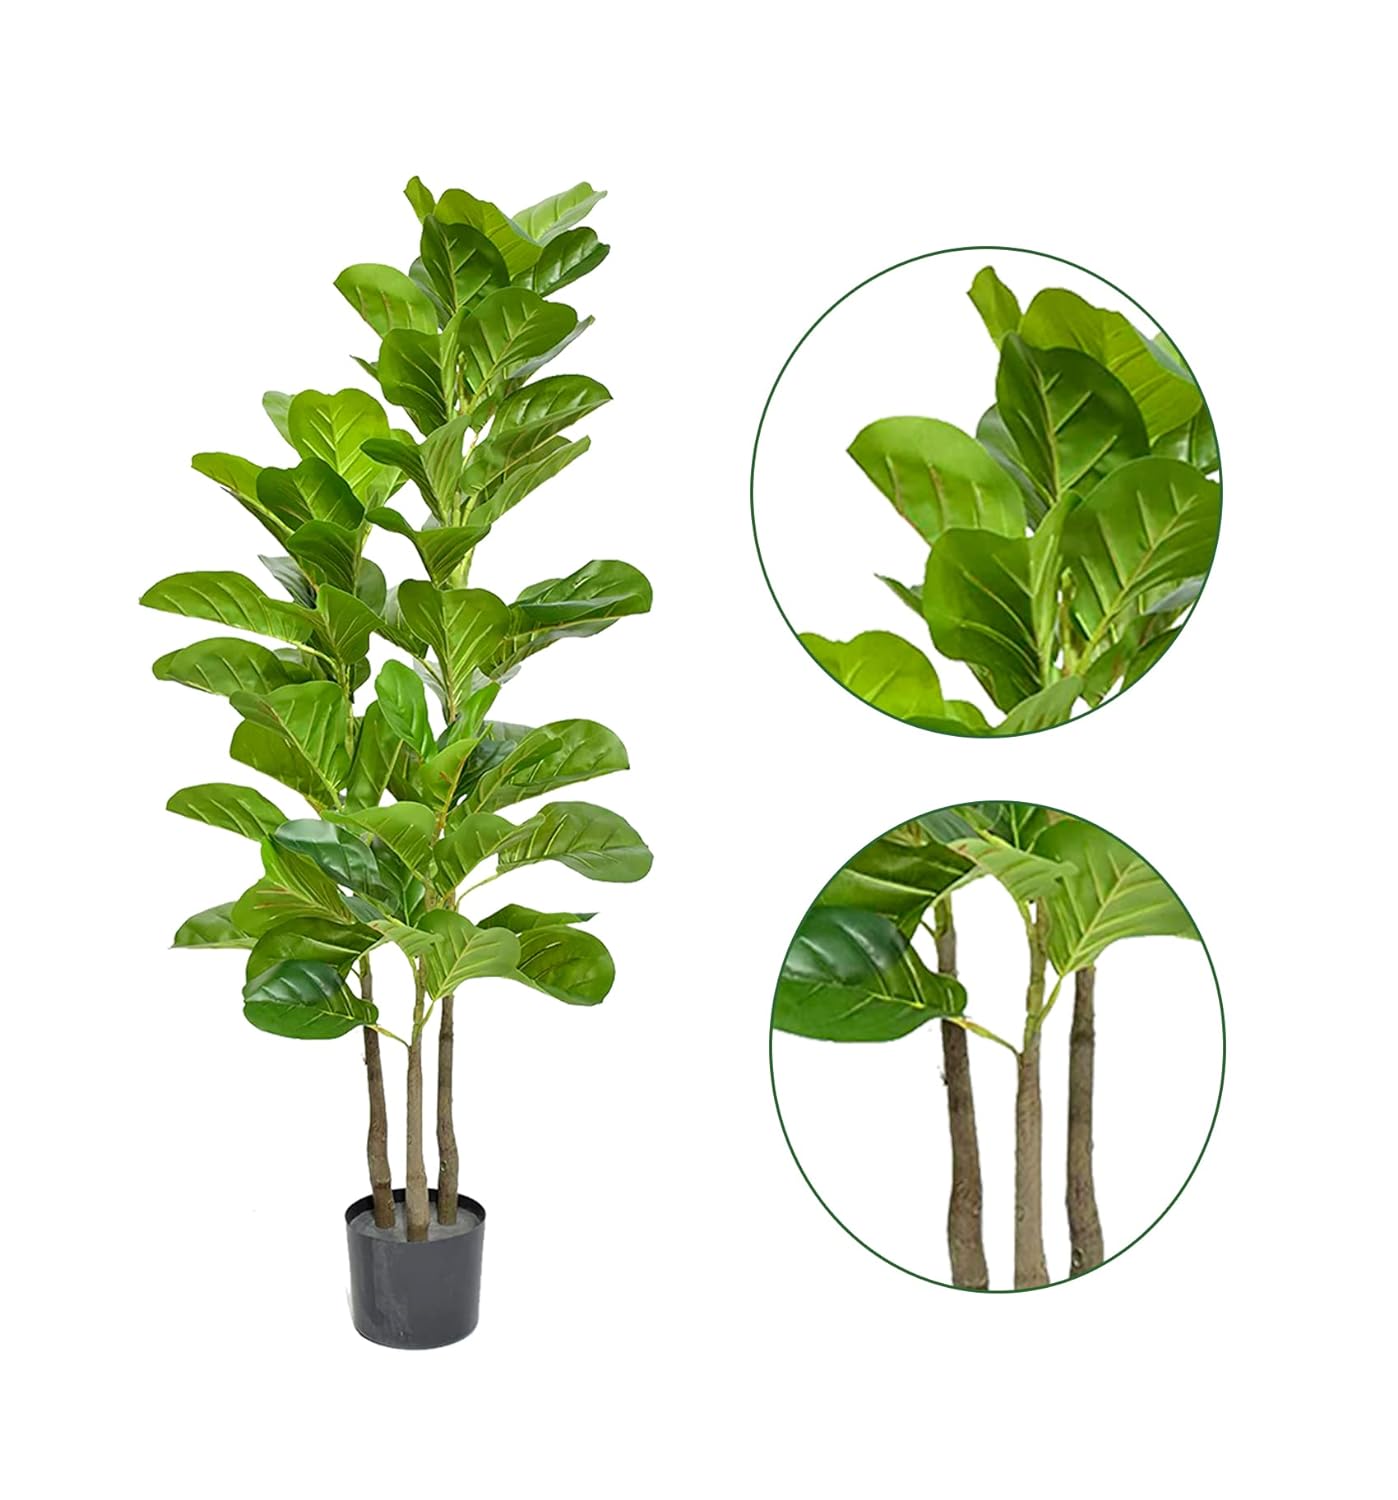 Kayra Decor 4 Feet Fiddle Leaf Fig Tree - Big Artificial Plants for Home Decor with Pot (Black)